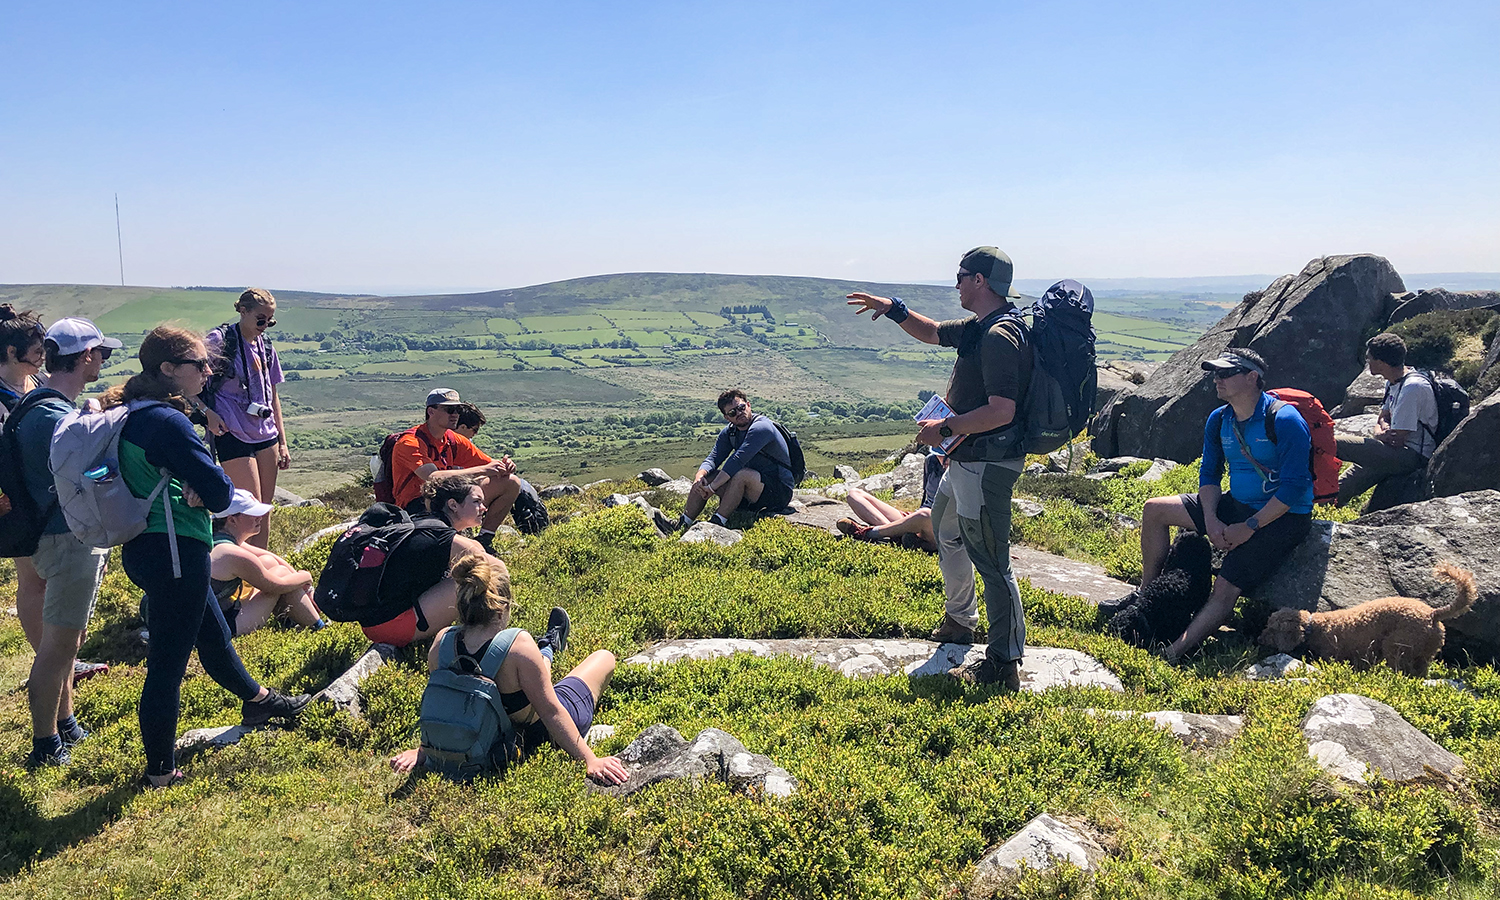 This week, we share photos from several of the HWS-led abroad programs occurring this summer. Here, students studying in Wales under the direction of Hobart Associate Dean David Mapstone ’93, P’21 learn of the importance of Bronze Age hillfort settlements in the Preseli Hills.